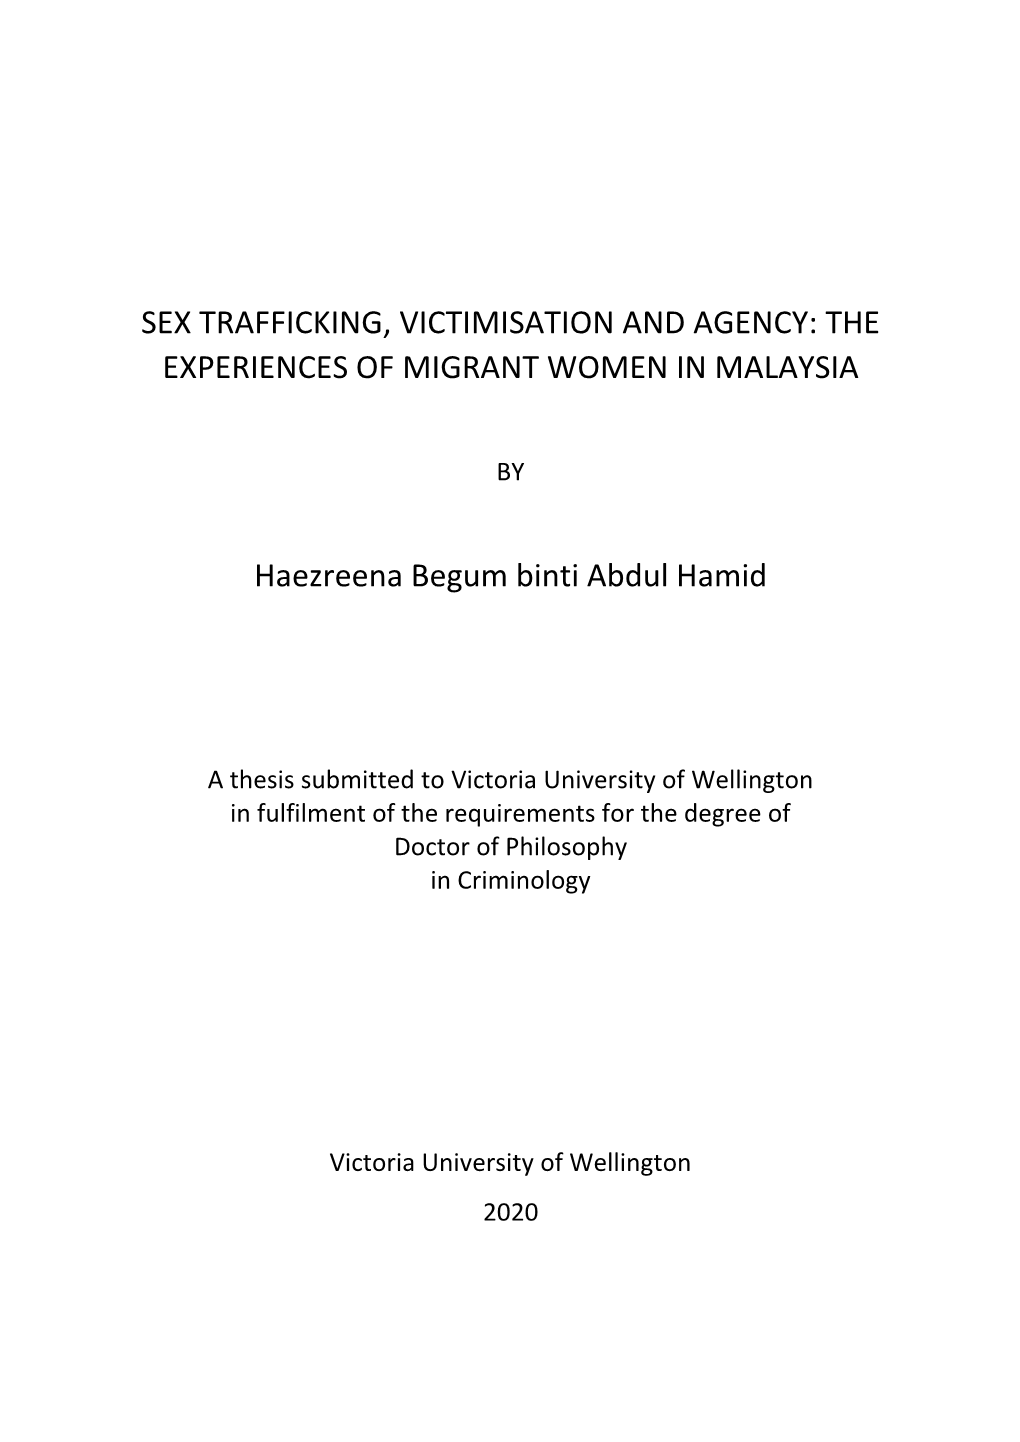 Sex Trafficking, Victimisation and Agency: the Experiences of Migrant Women in Malaysia